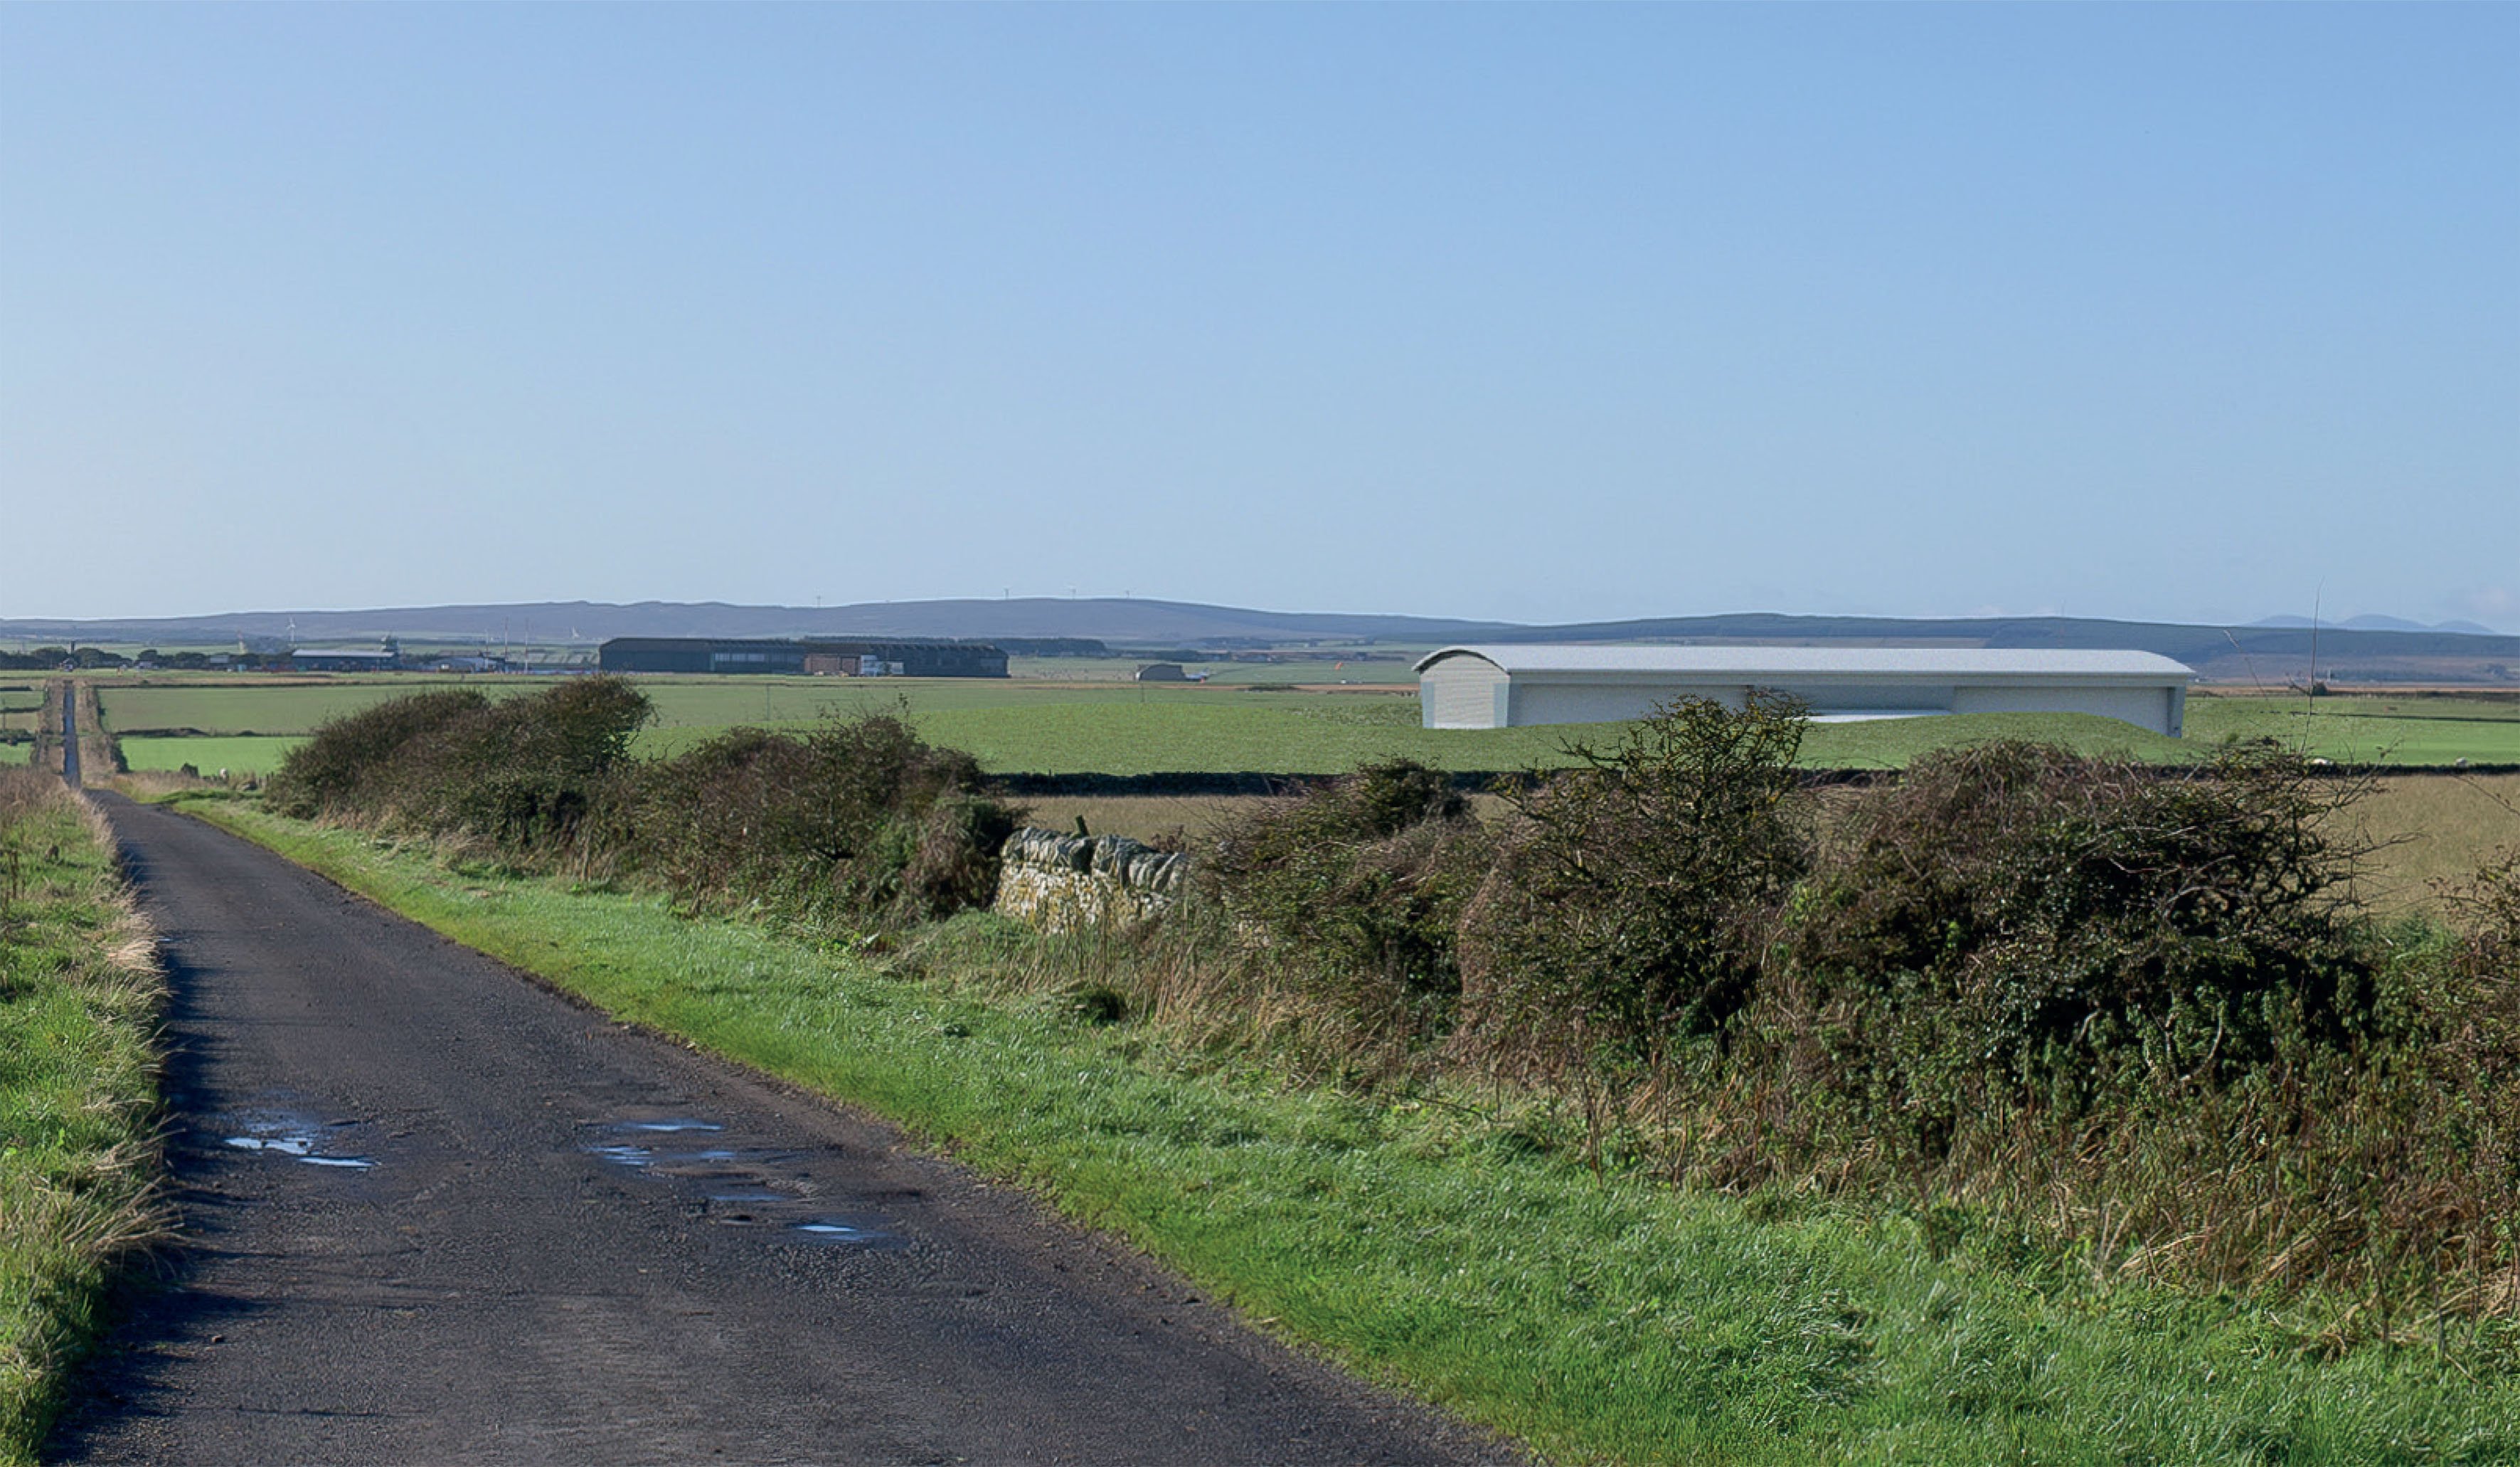 A rural road, in the background a white building with a rounded roof is visible over a low rise.